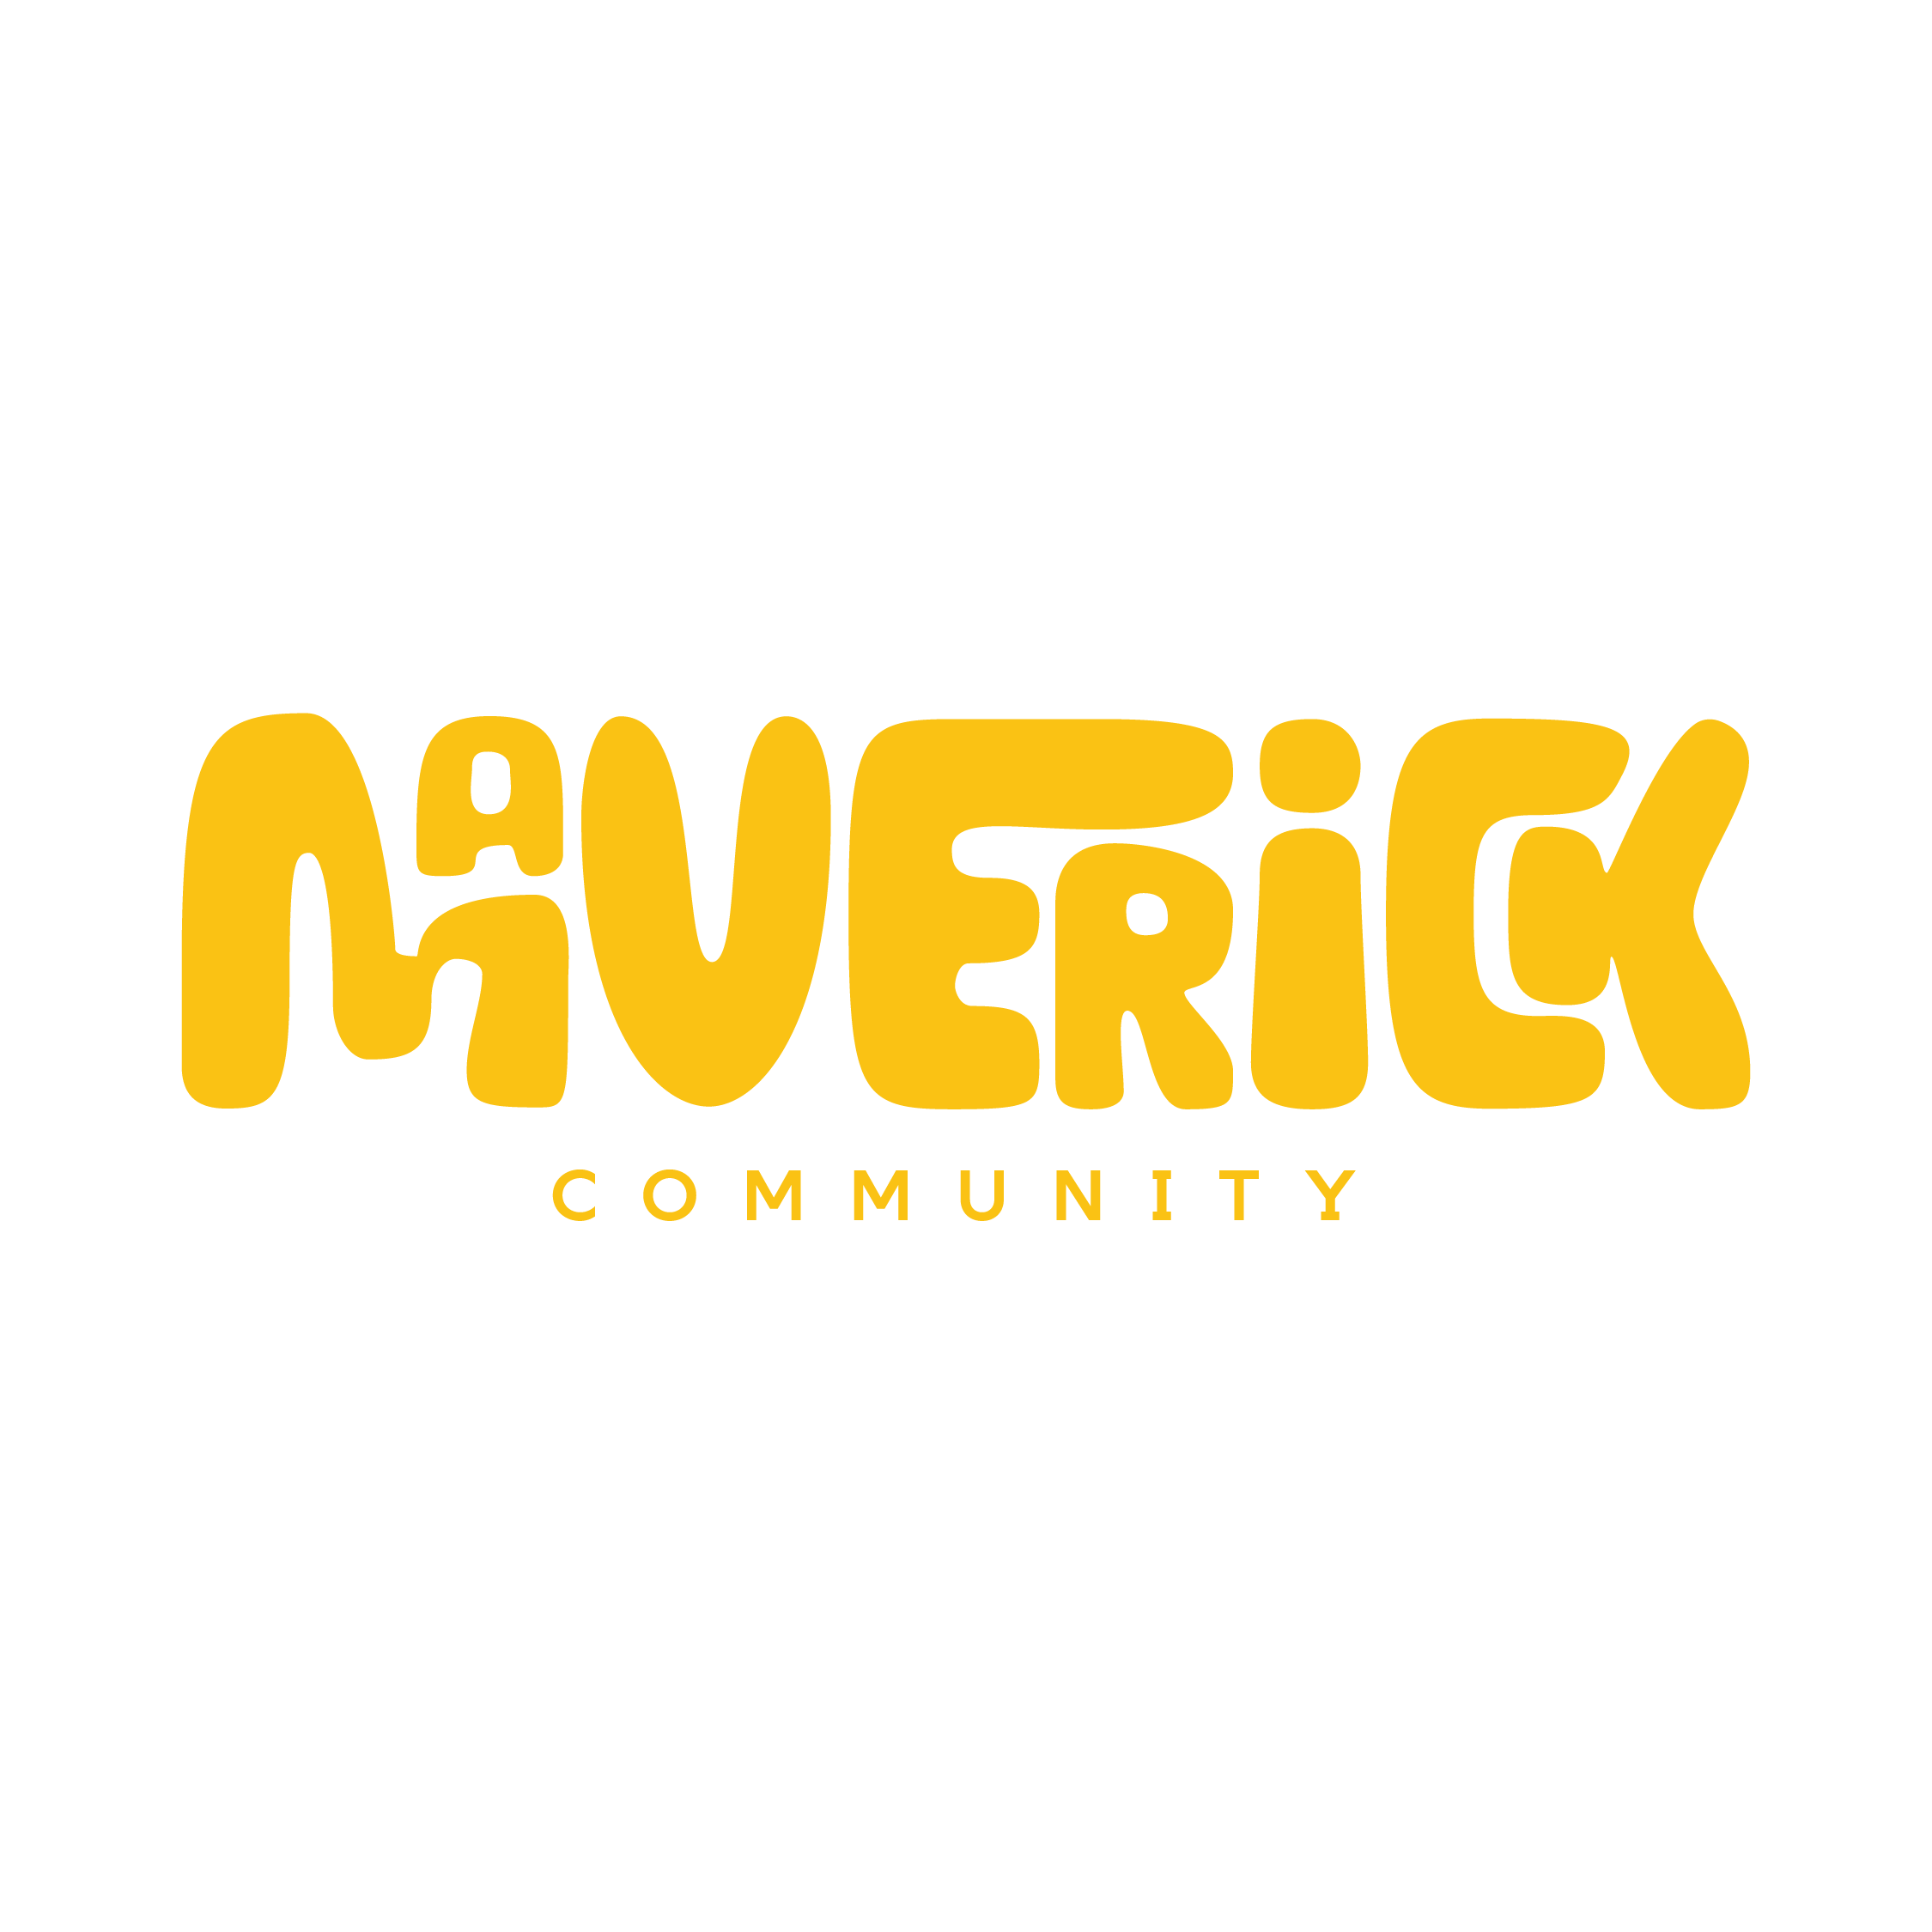 The Ultimate Home for Trainers - Maverick Community